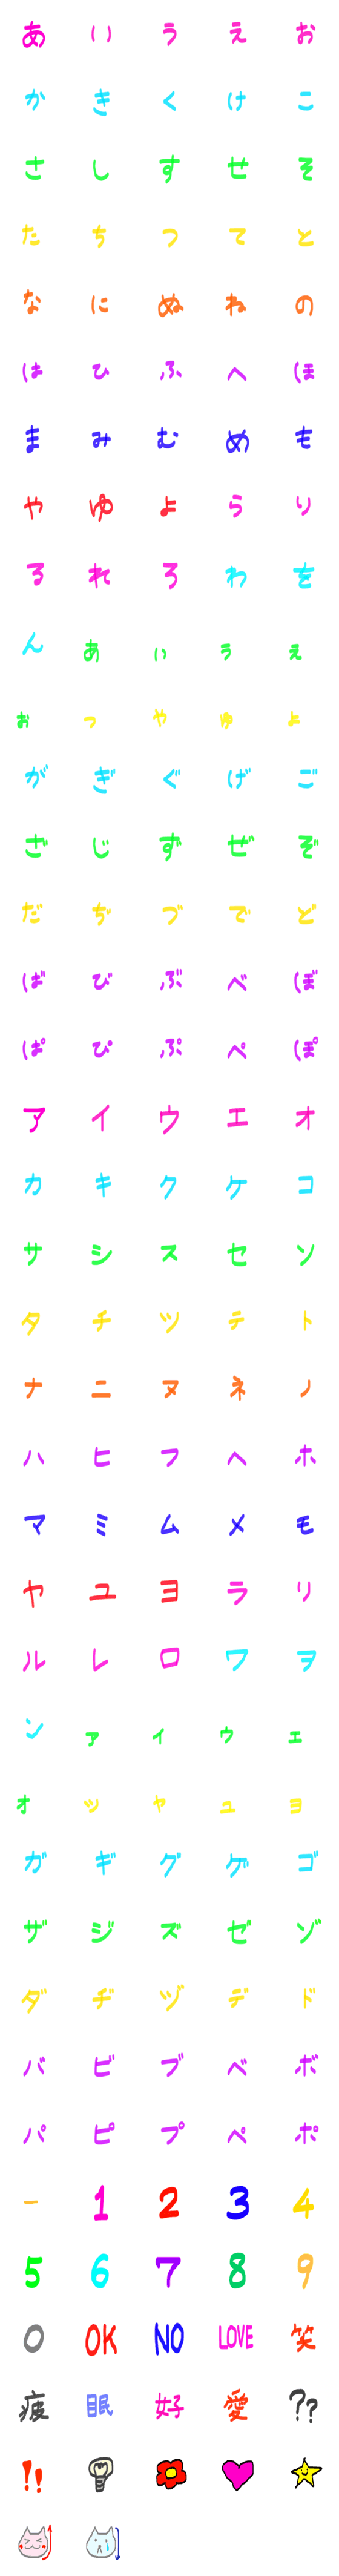 [LINE絵文字]蛍光マーカー文字の画像一覧